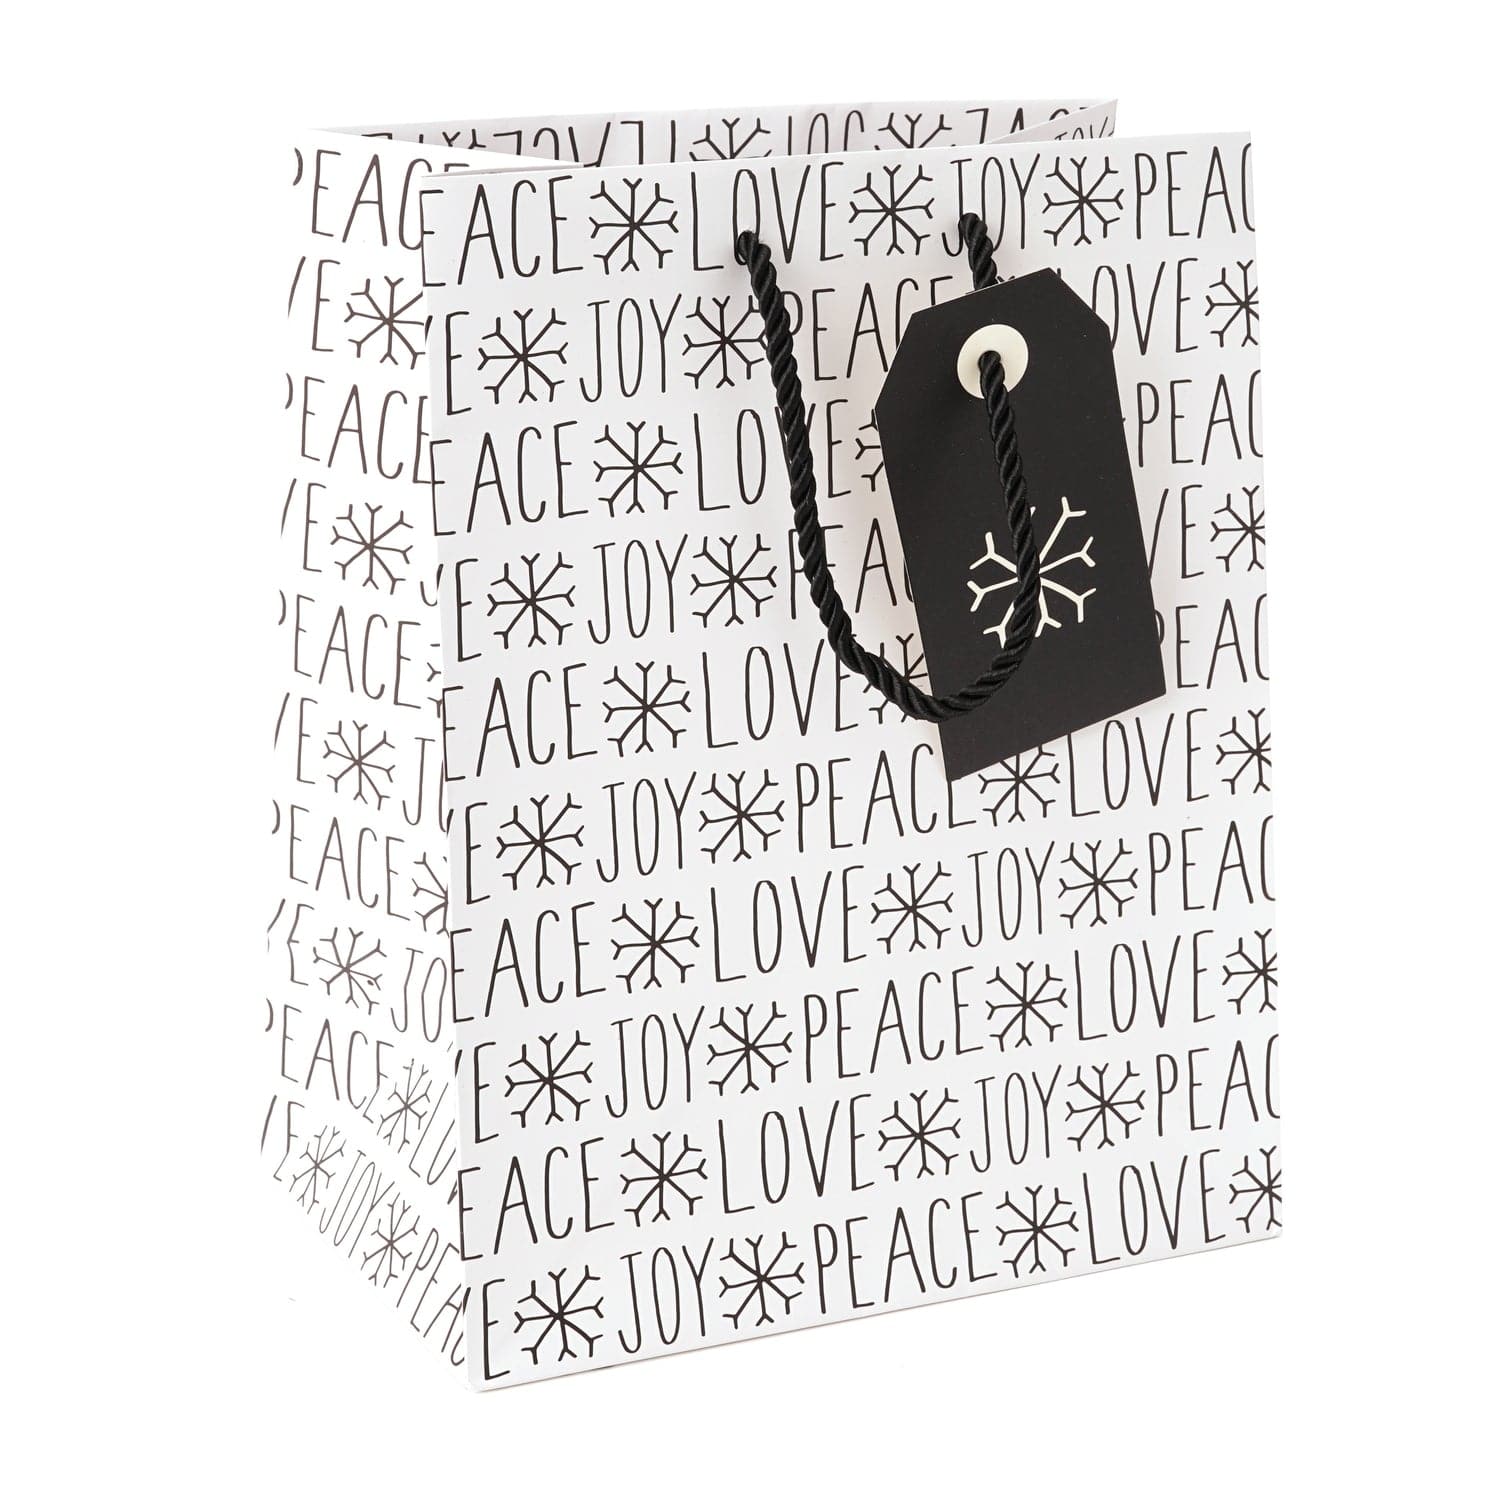 Joy and Love - Medium Gift Bag with Tissue Paper - 145 Units